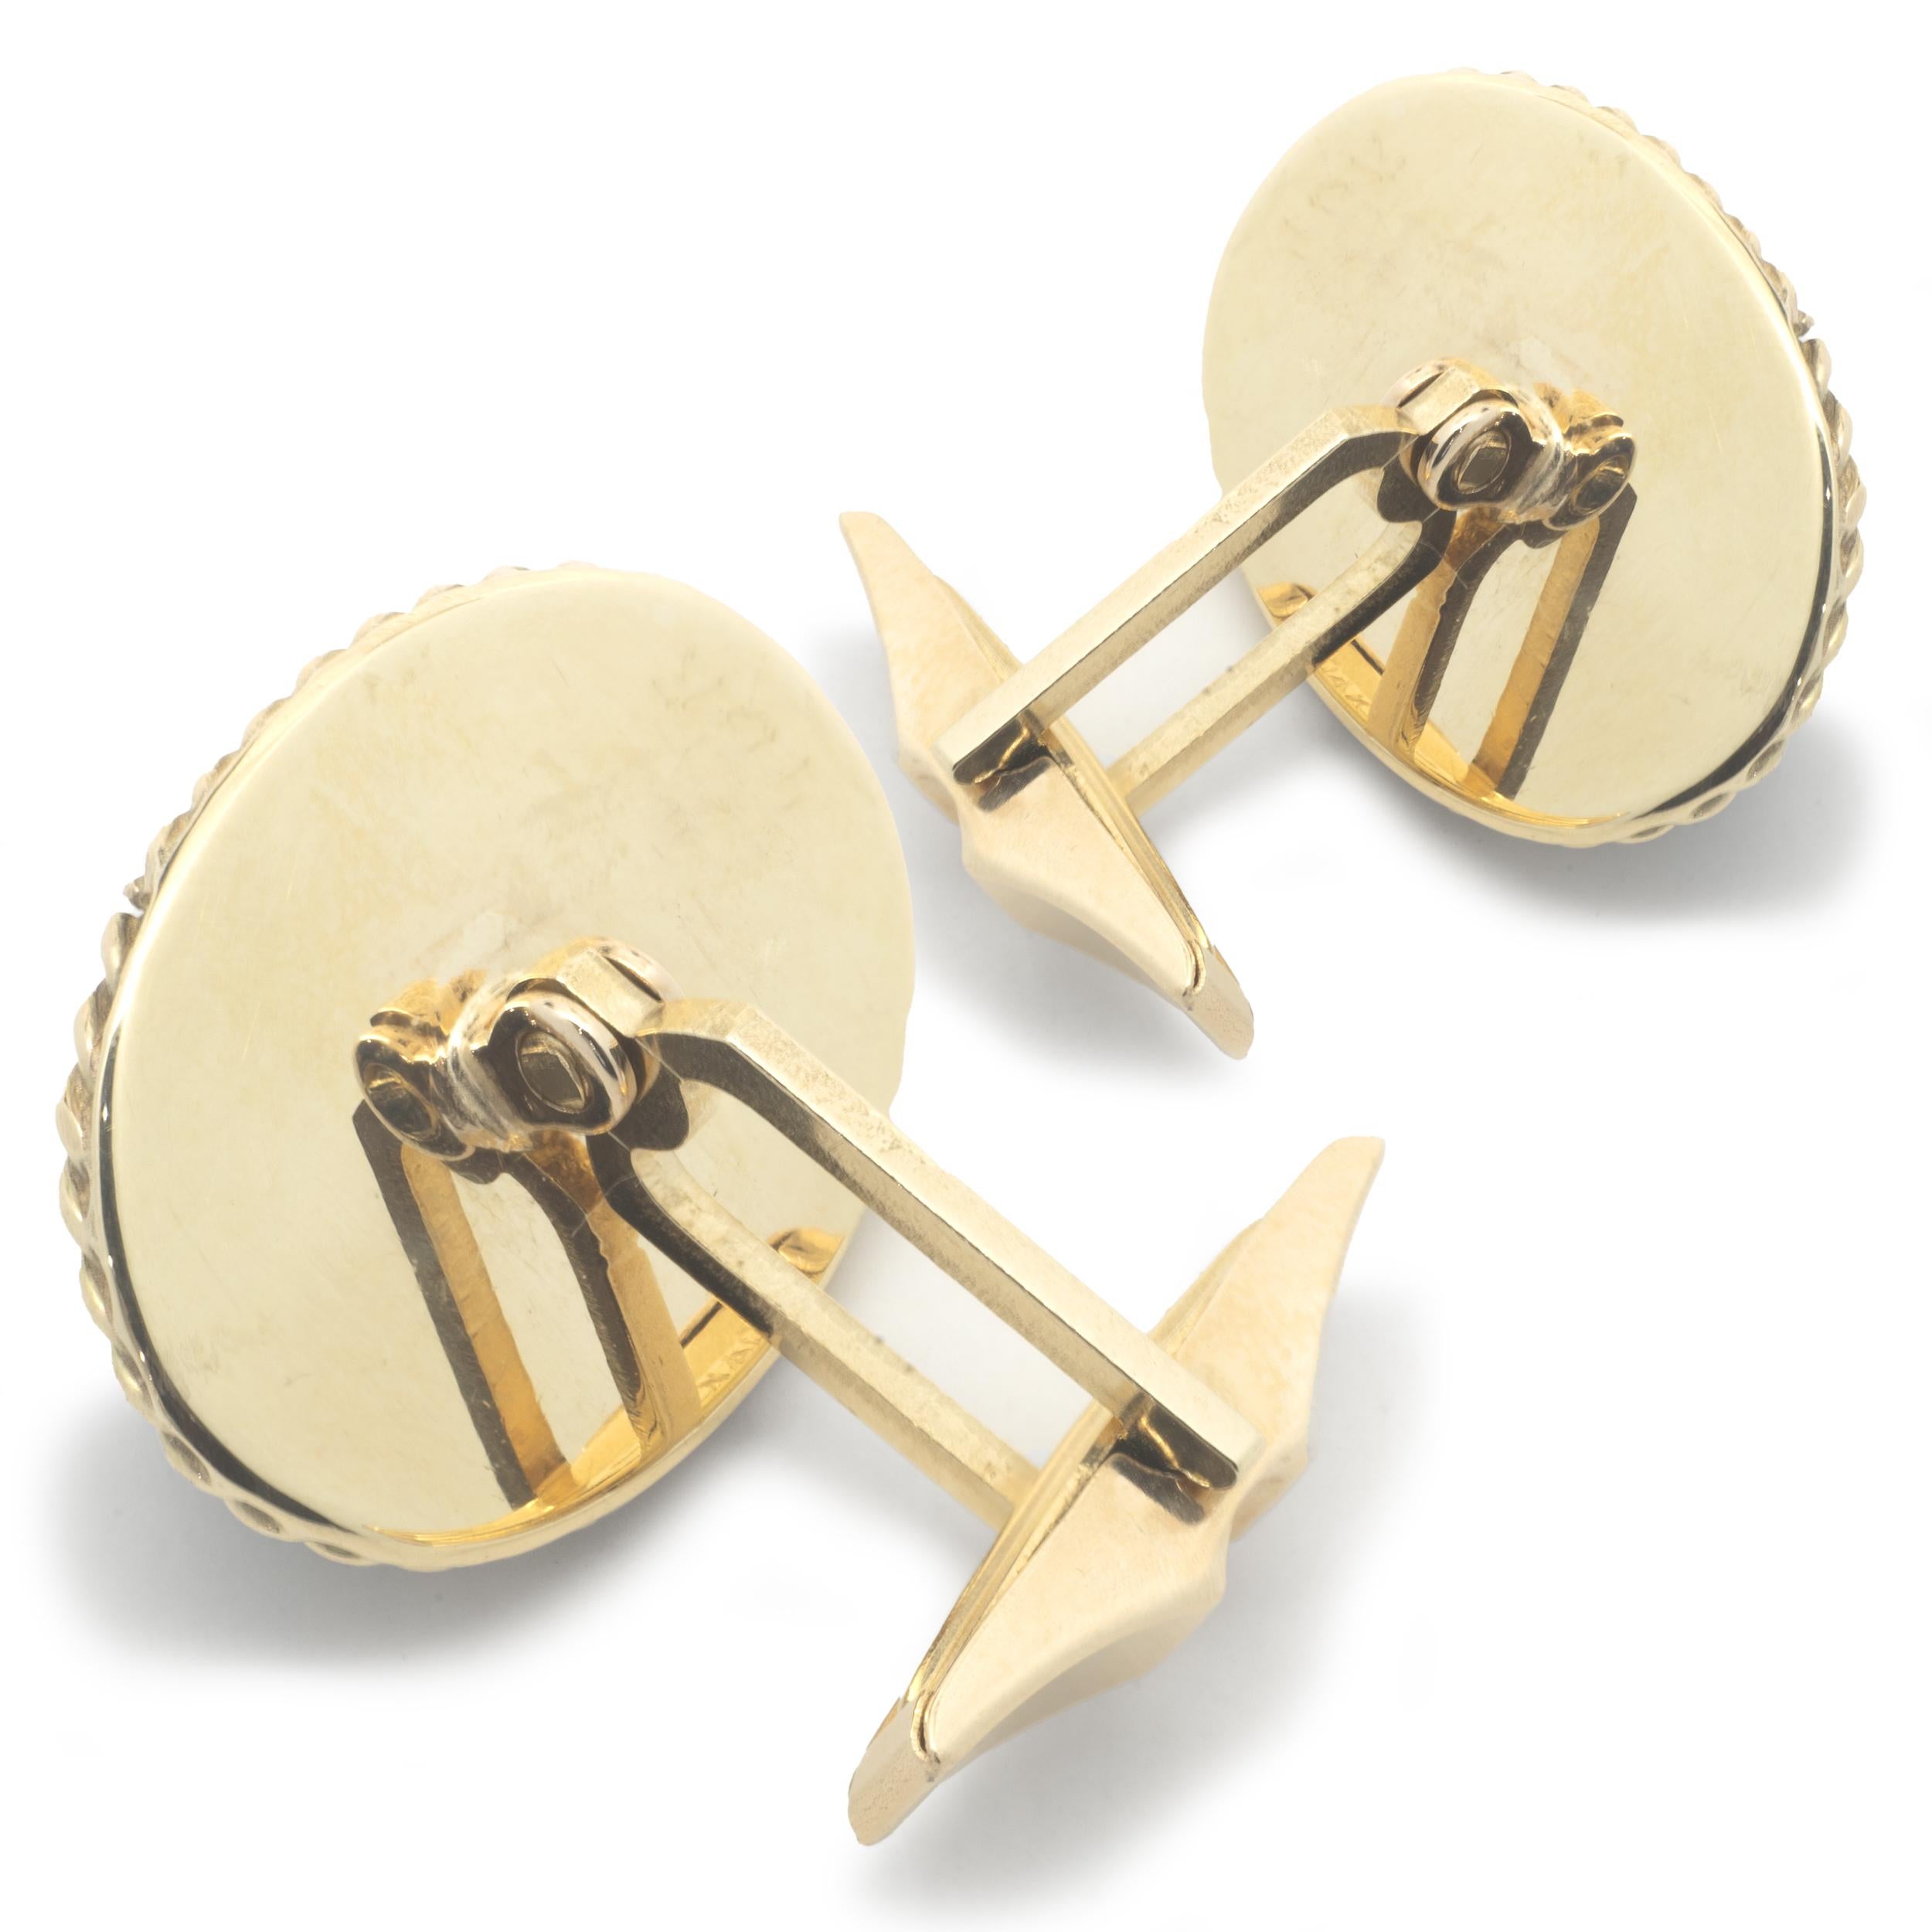 Material: 14k yellow gold
Dimensions: cufflinks measure 17 X22mm 
Weight: 14.39 grams
